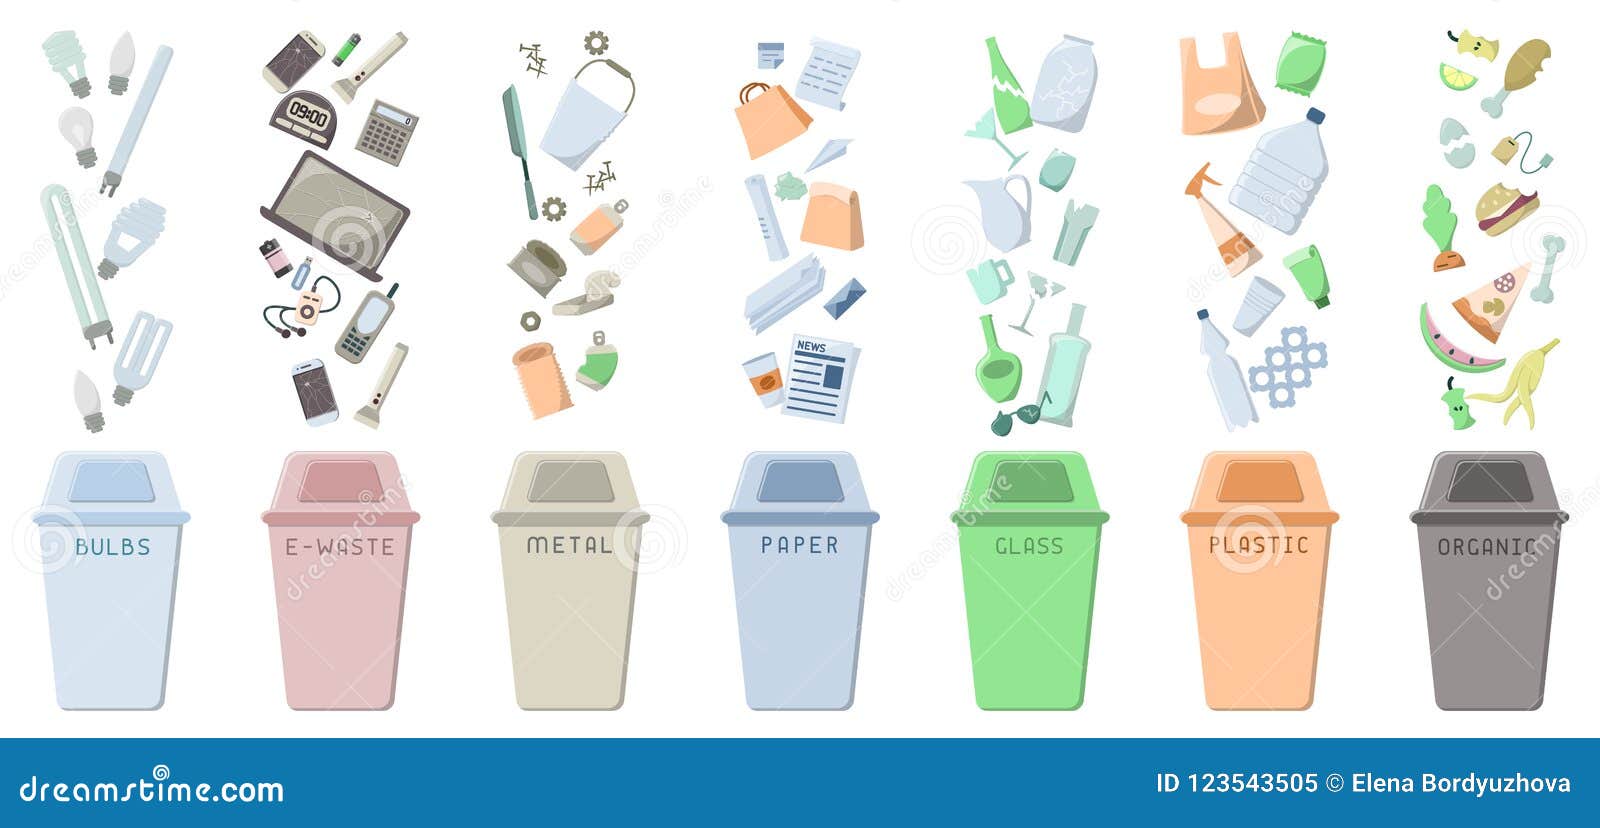 waste sorting icons set with dustbins and trash